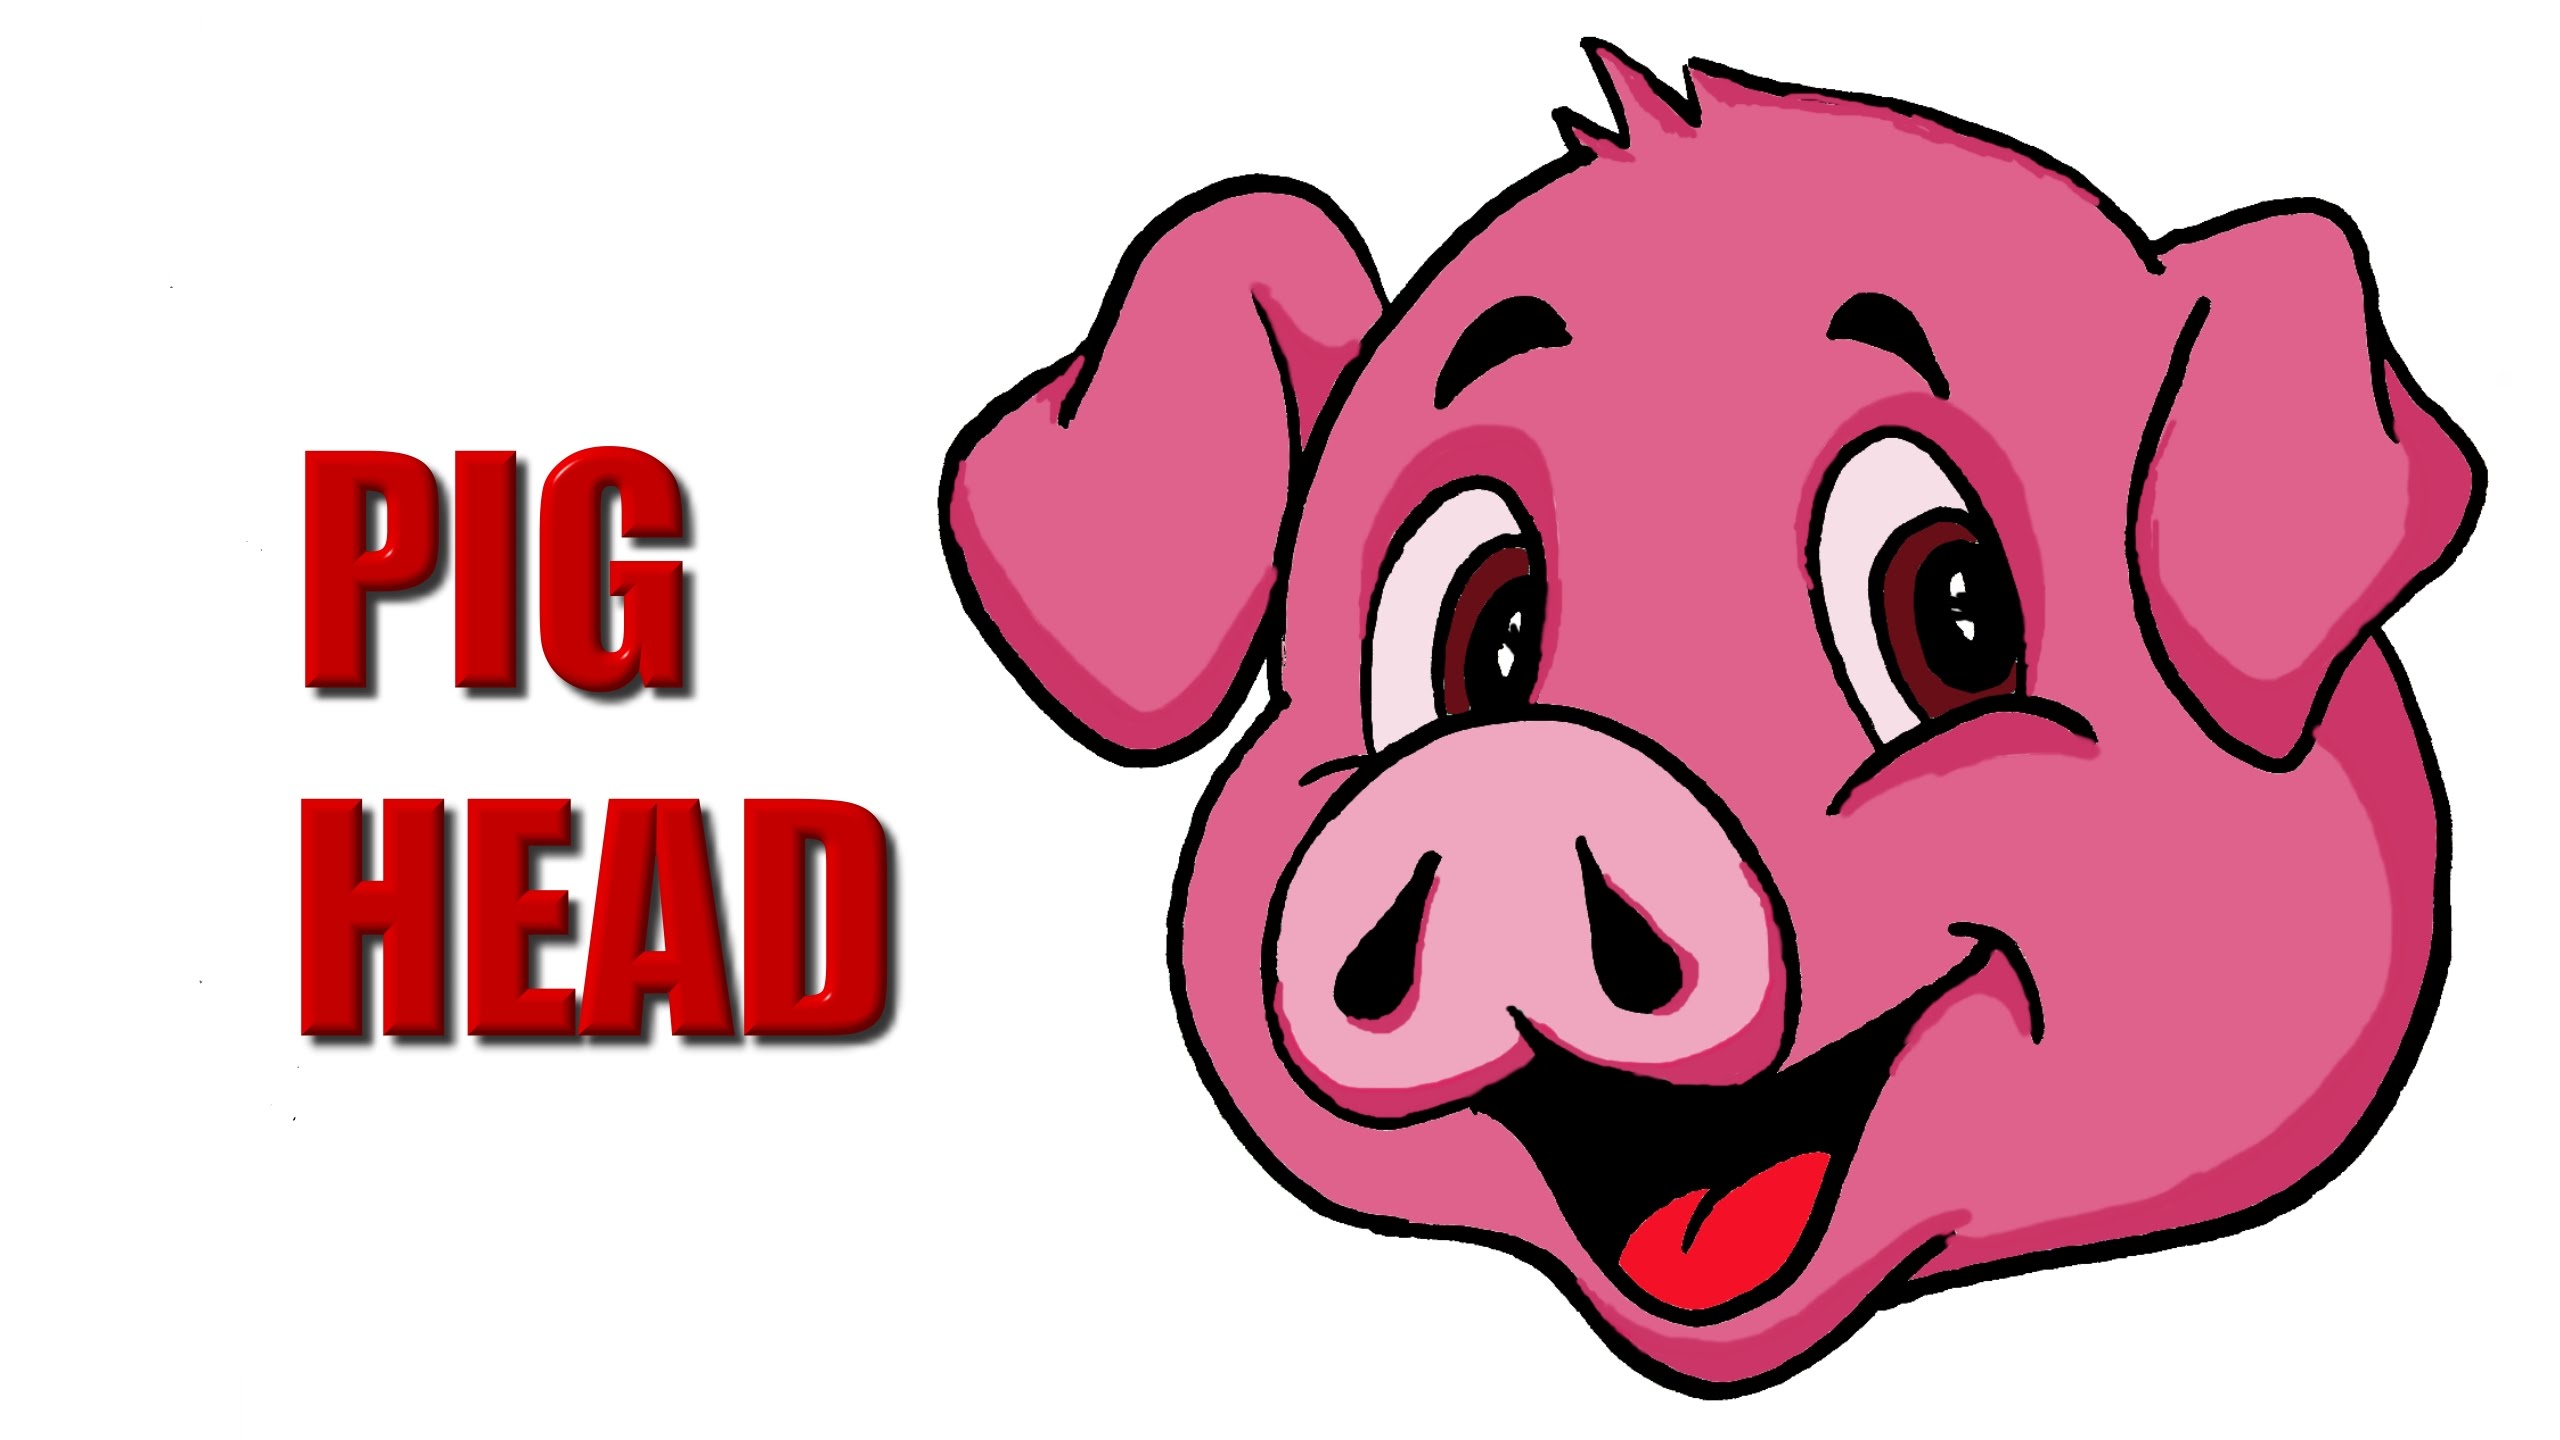 HOW TO DRAW A PIG HEAD - HD - YouTube